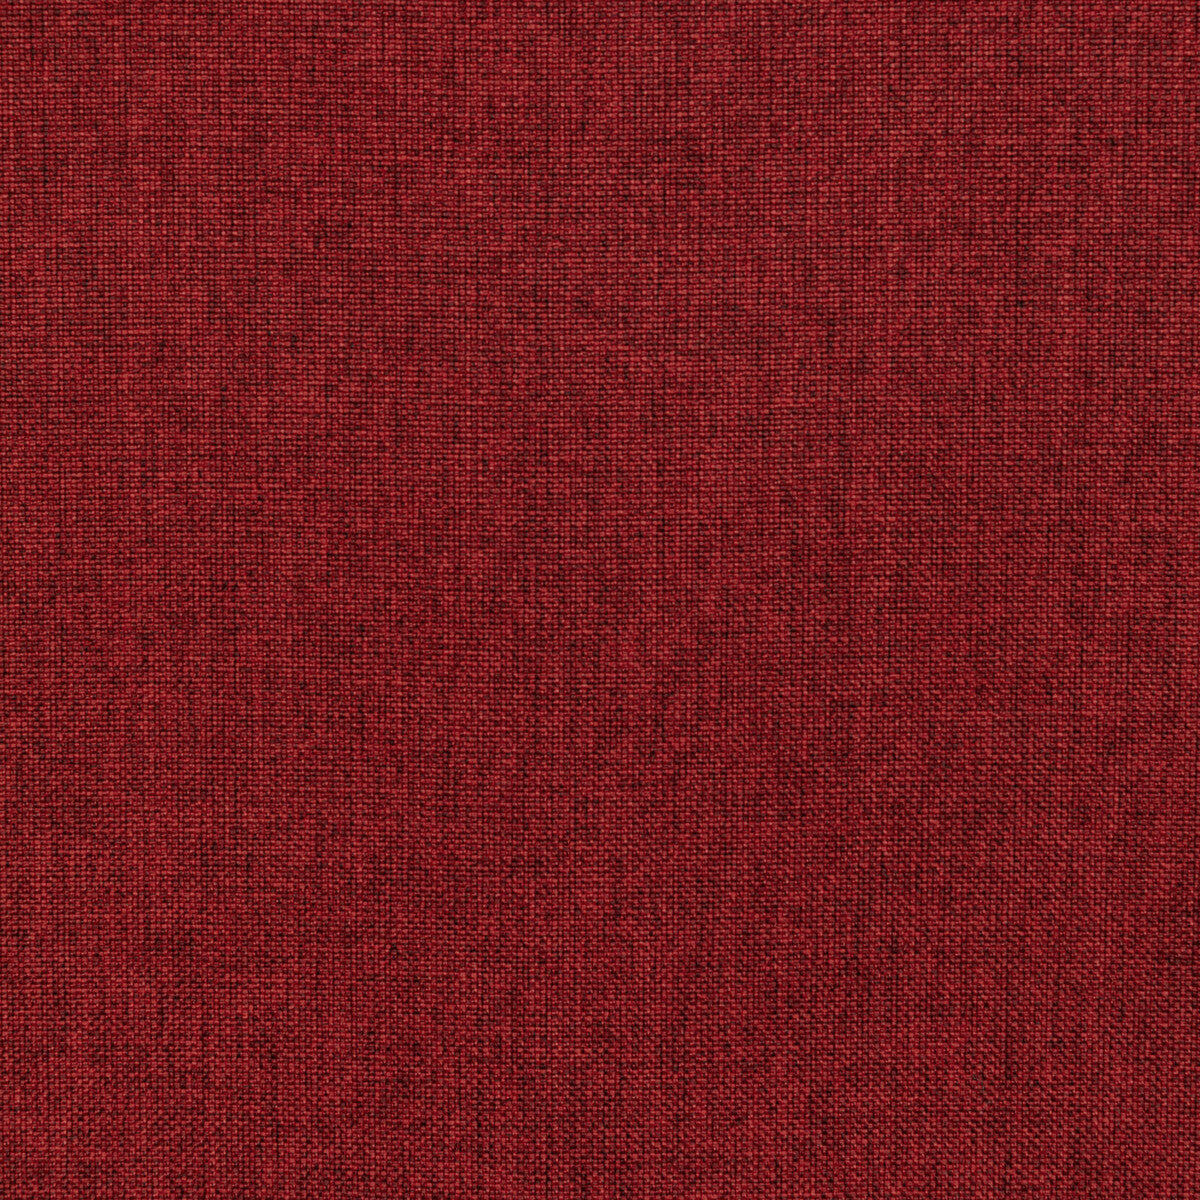 Fortify fabric in chili color - pattern 36257.19.0 - by Kravet Contract in the Supreen collection